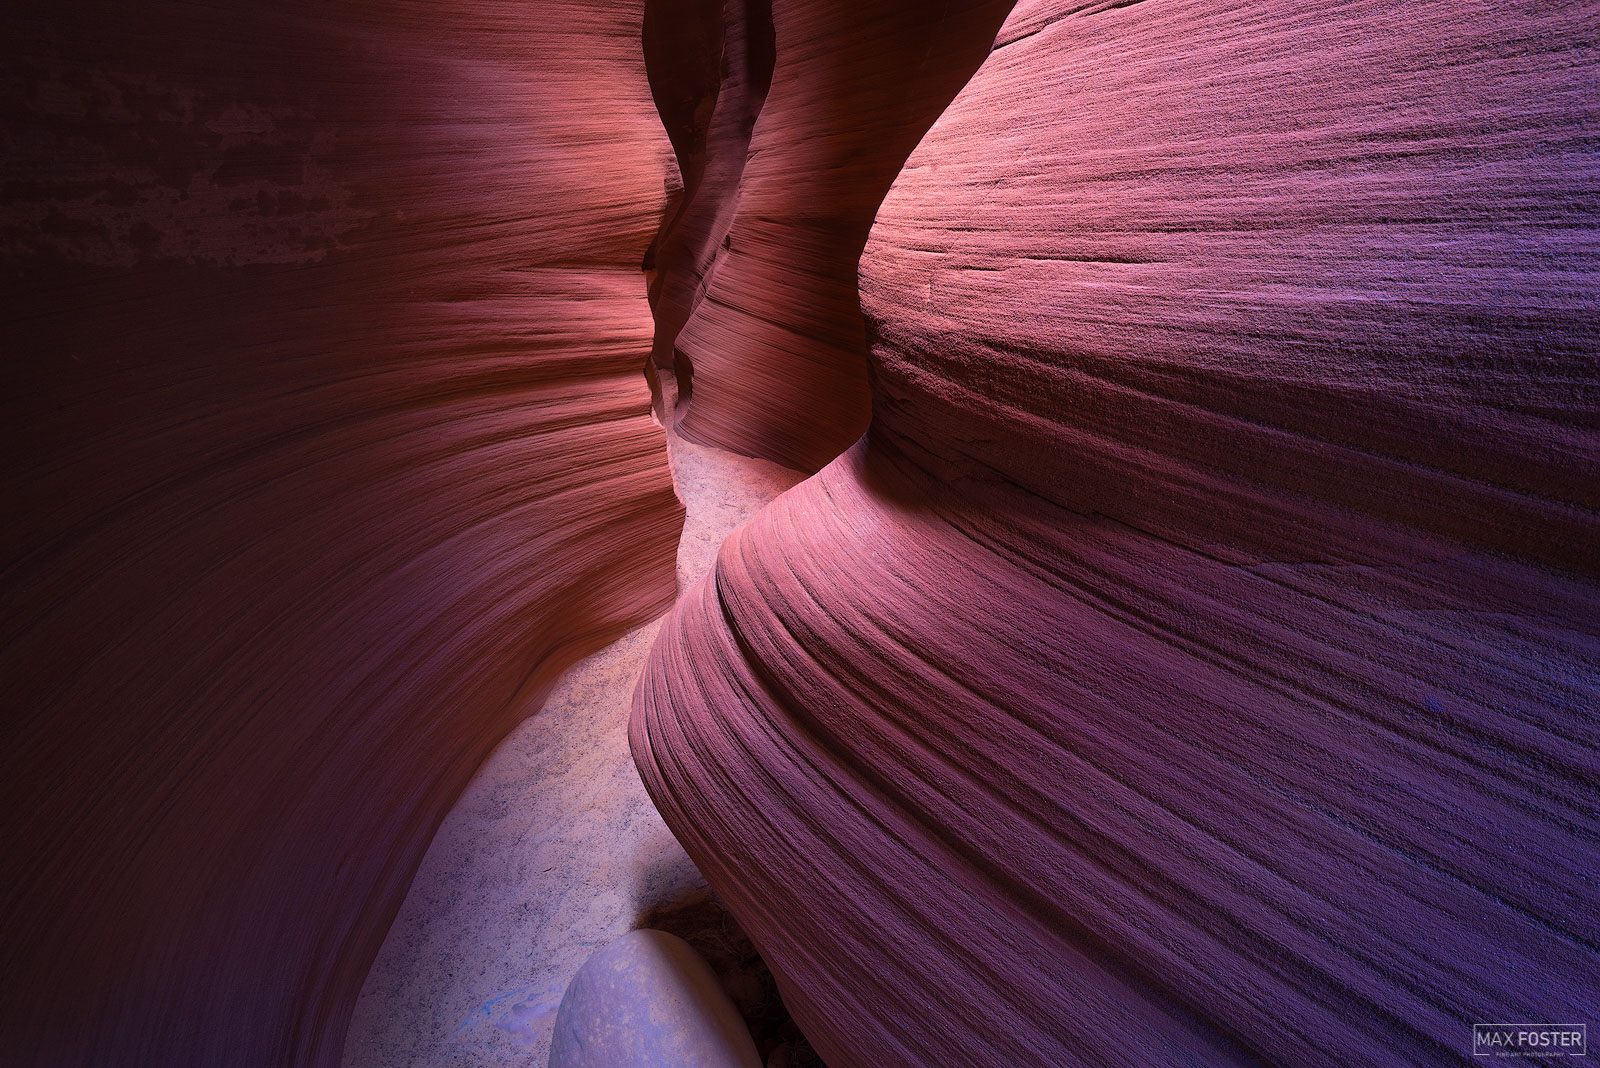 Refresh your space with Mystical, Max Foster's limited edition photography print of a slot canyon in Page, Arizona from his Slot...